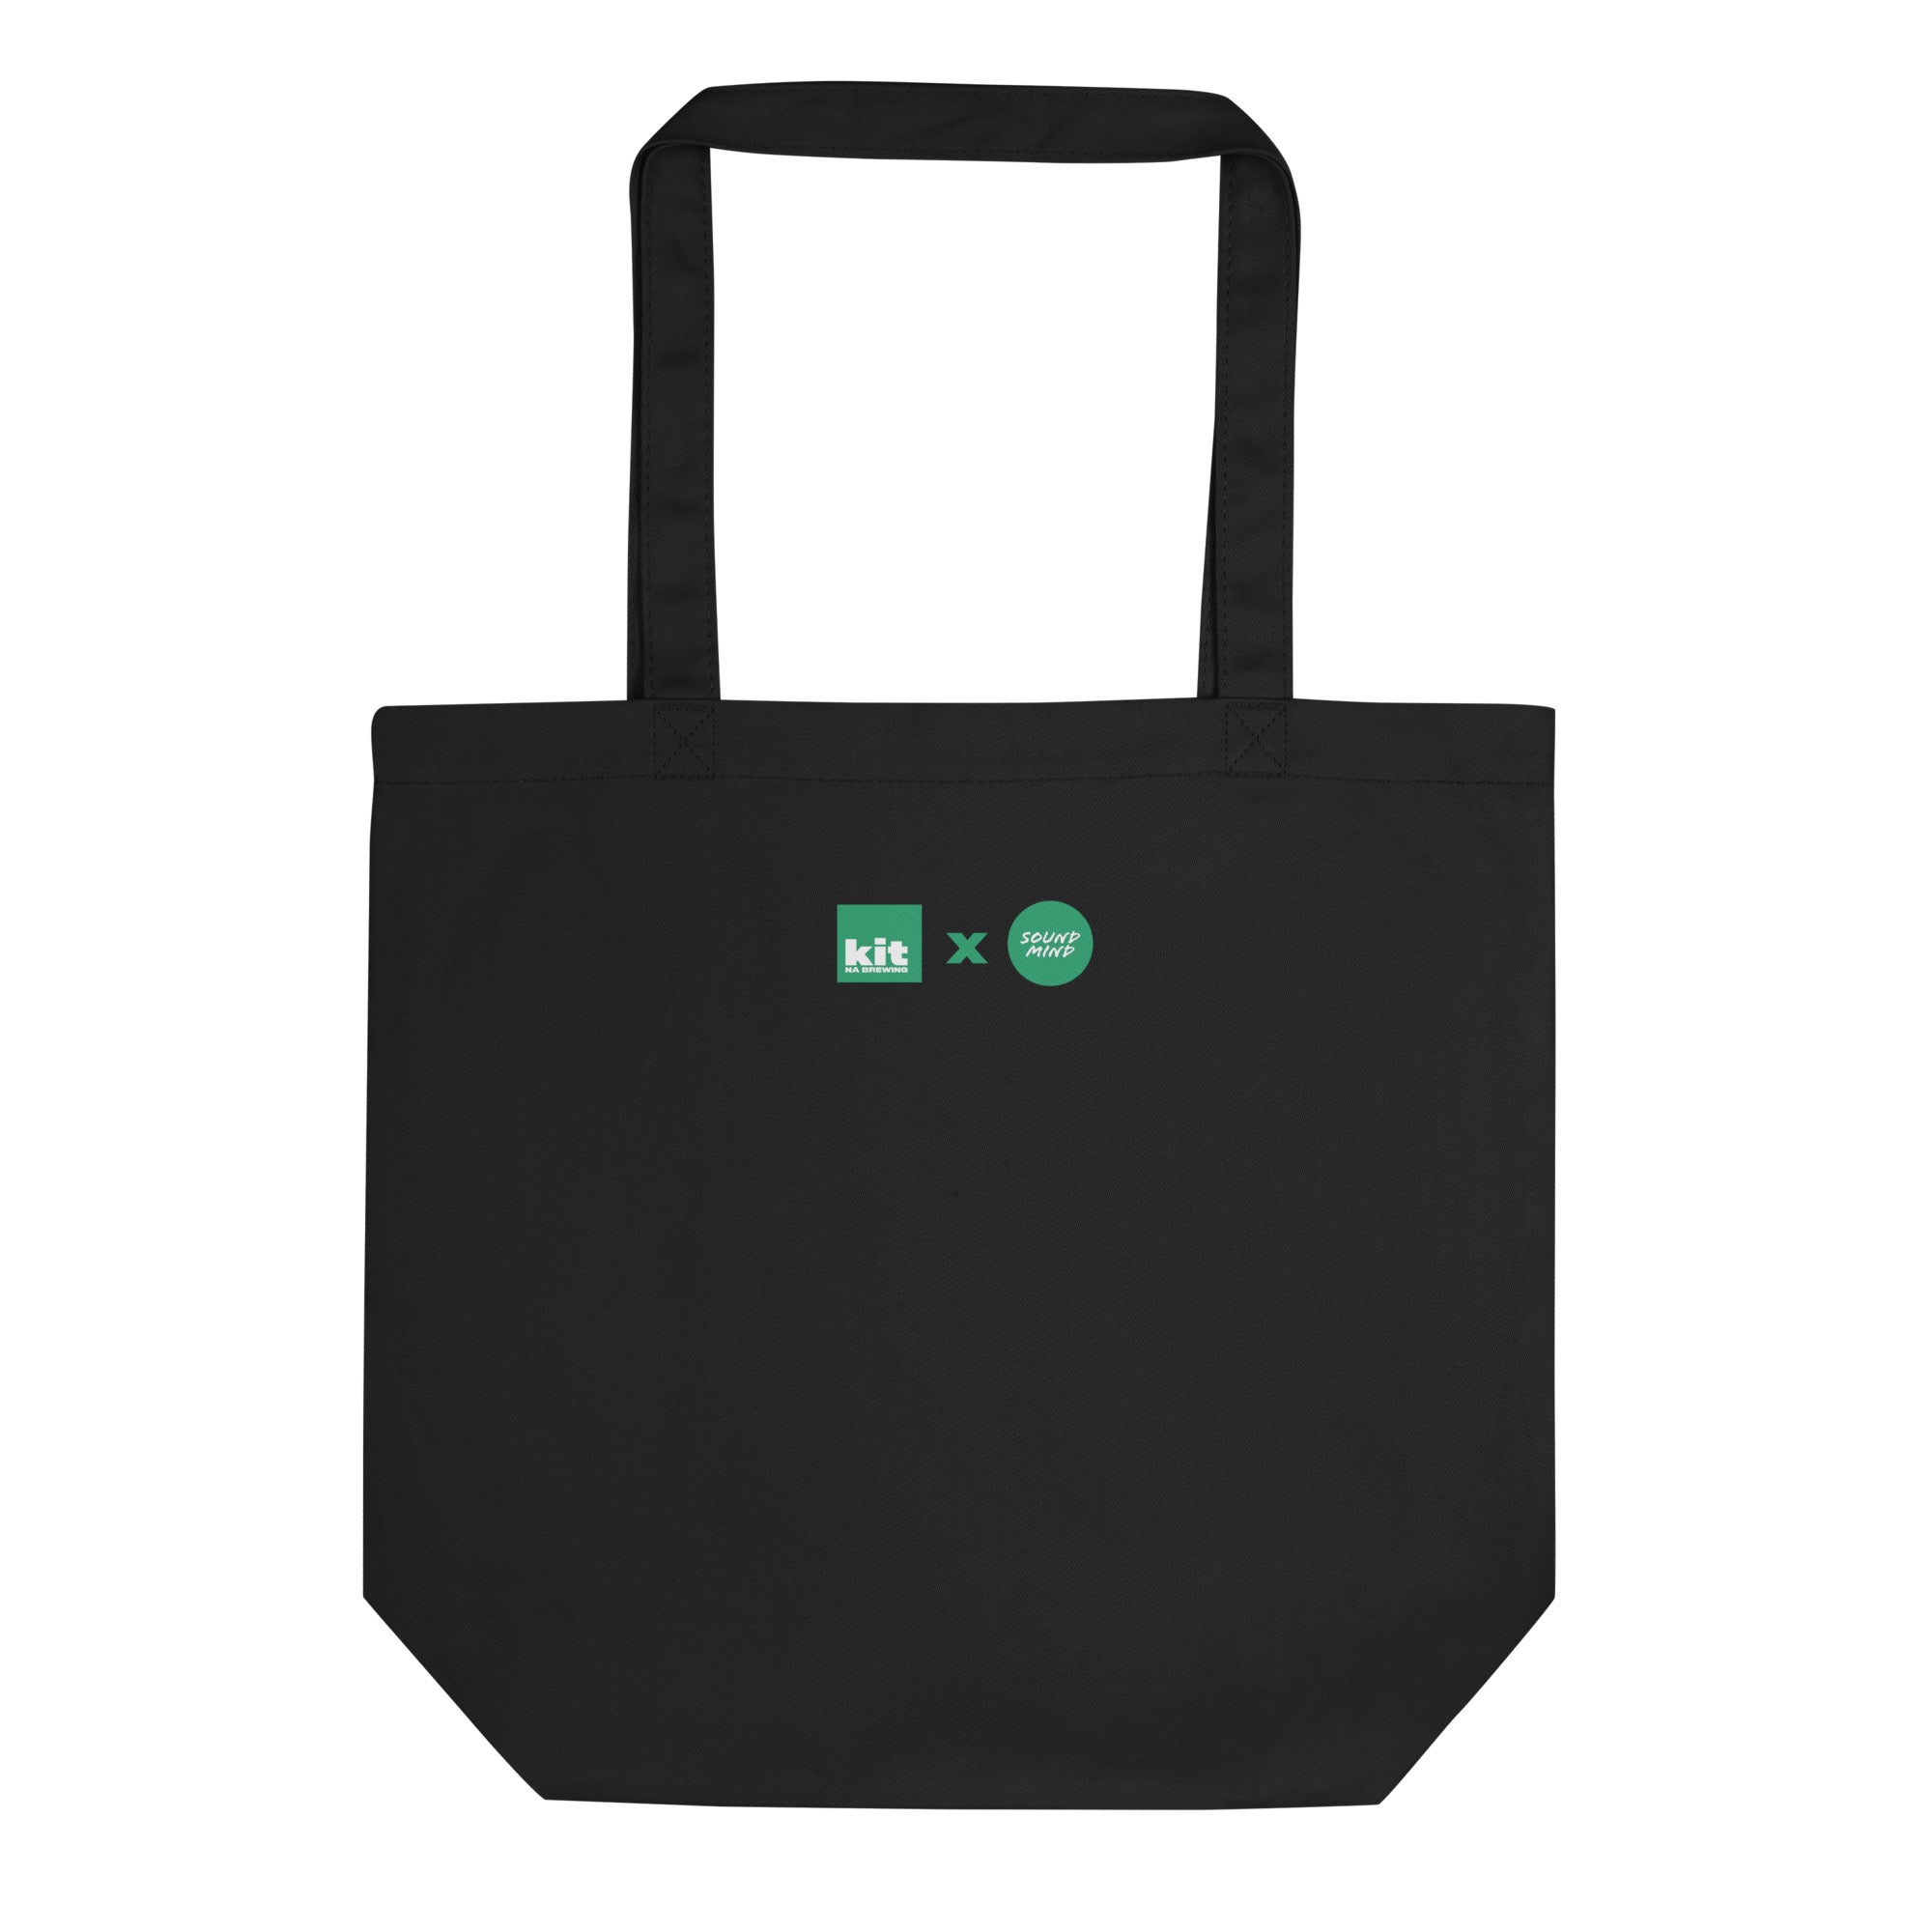 Tuned In for Mental Health Eco Tote Bag